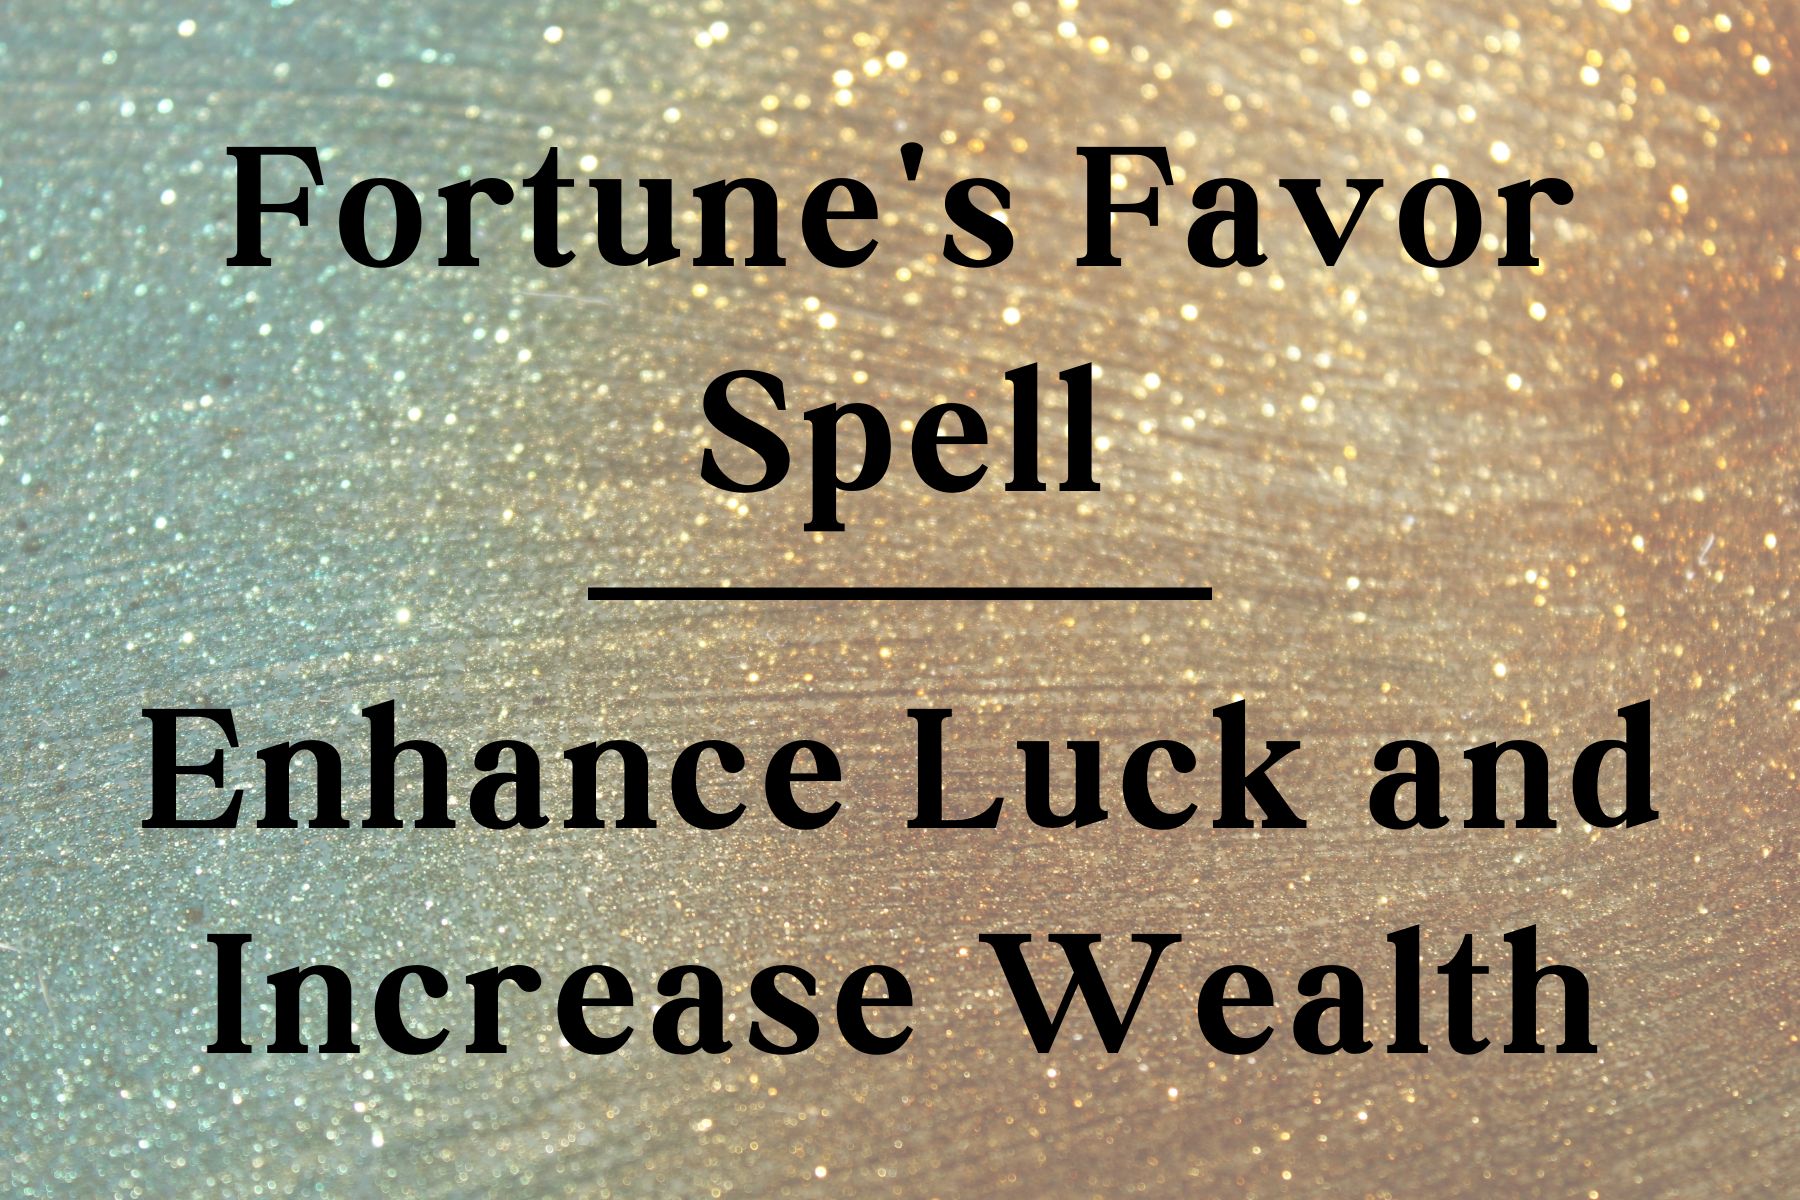 Fortune’s Favor: Spell to Enhance Luck and Increase Wealth